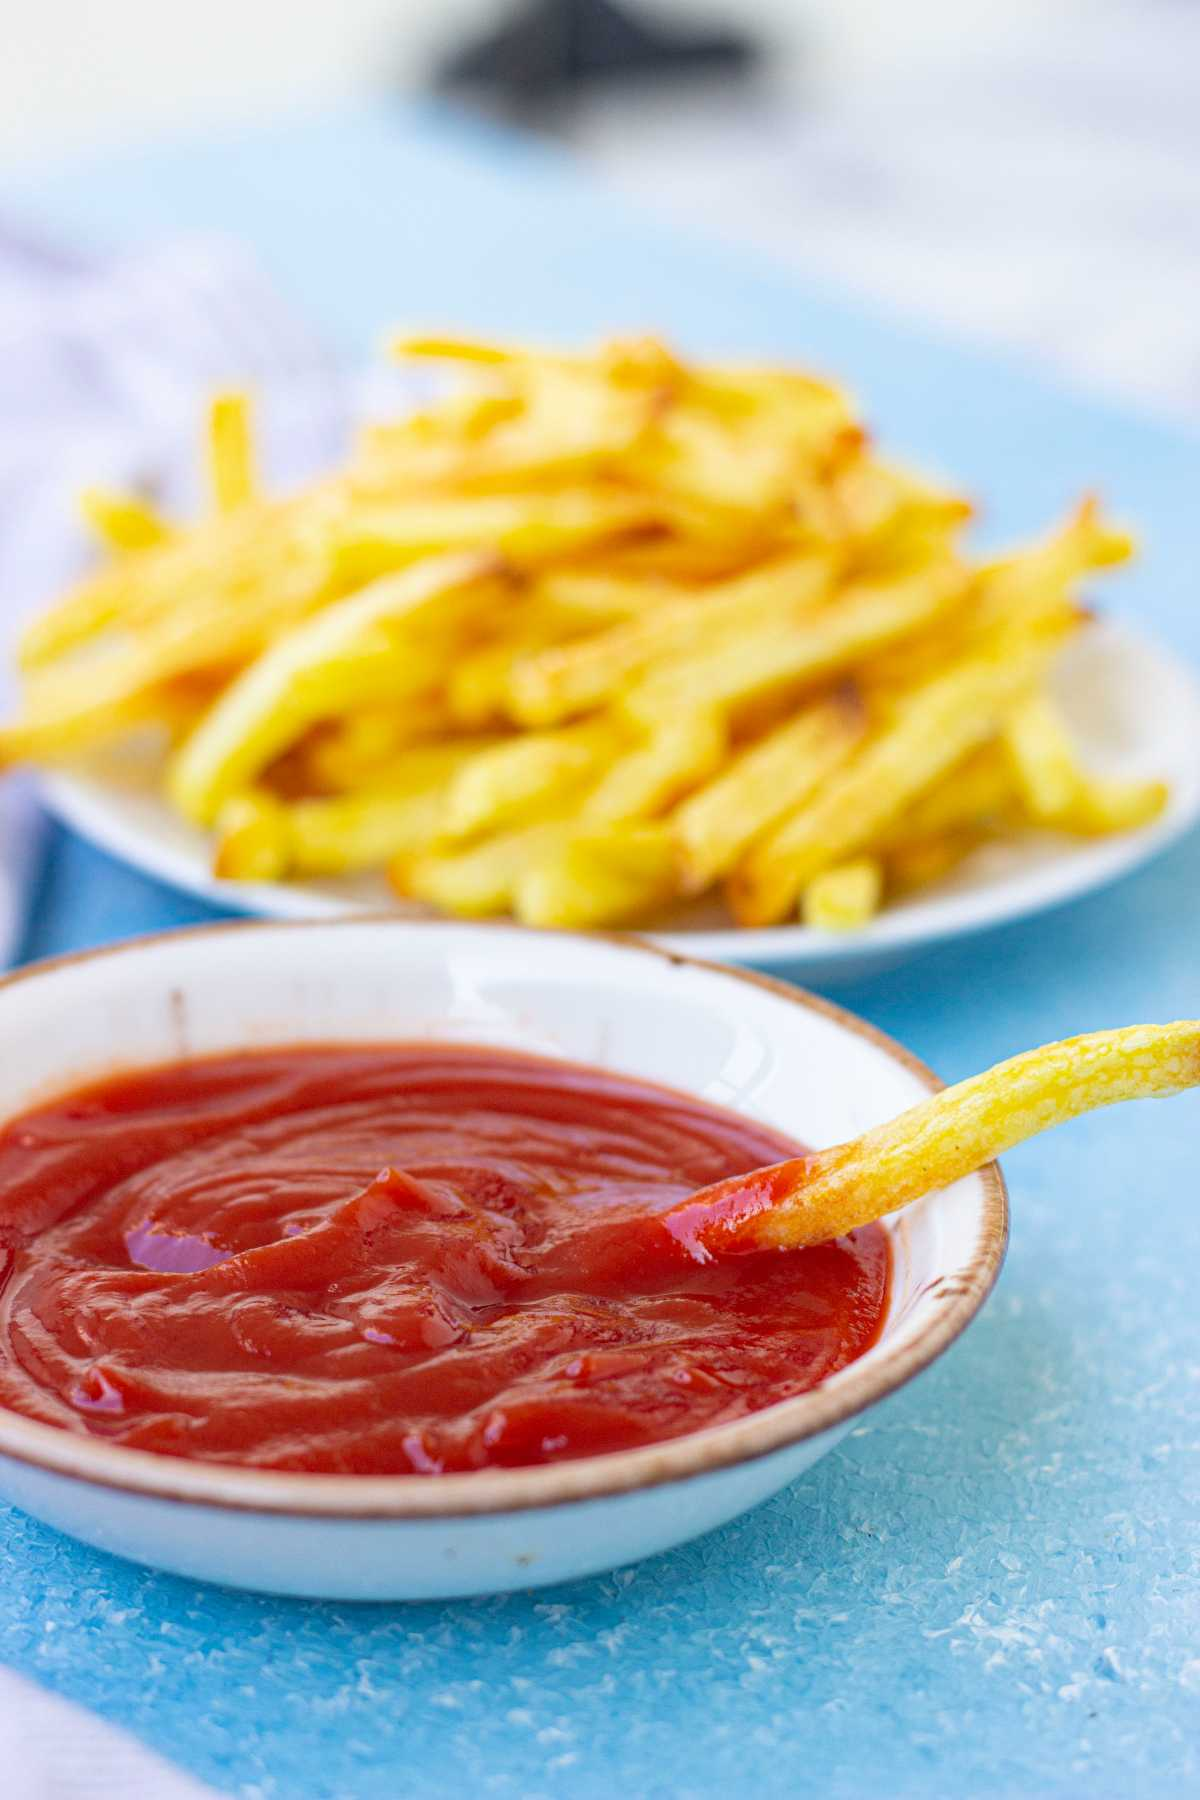 A bowl of ketchup being dipped a piece of fries and a plate of cooked fries at the back.